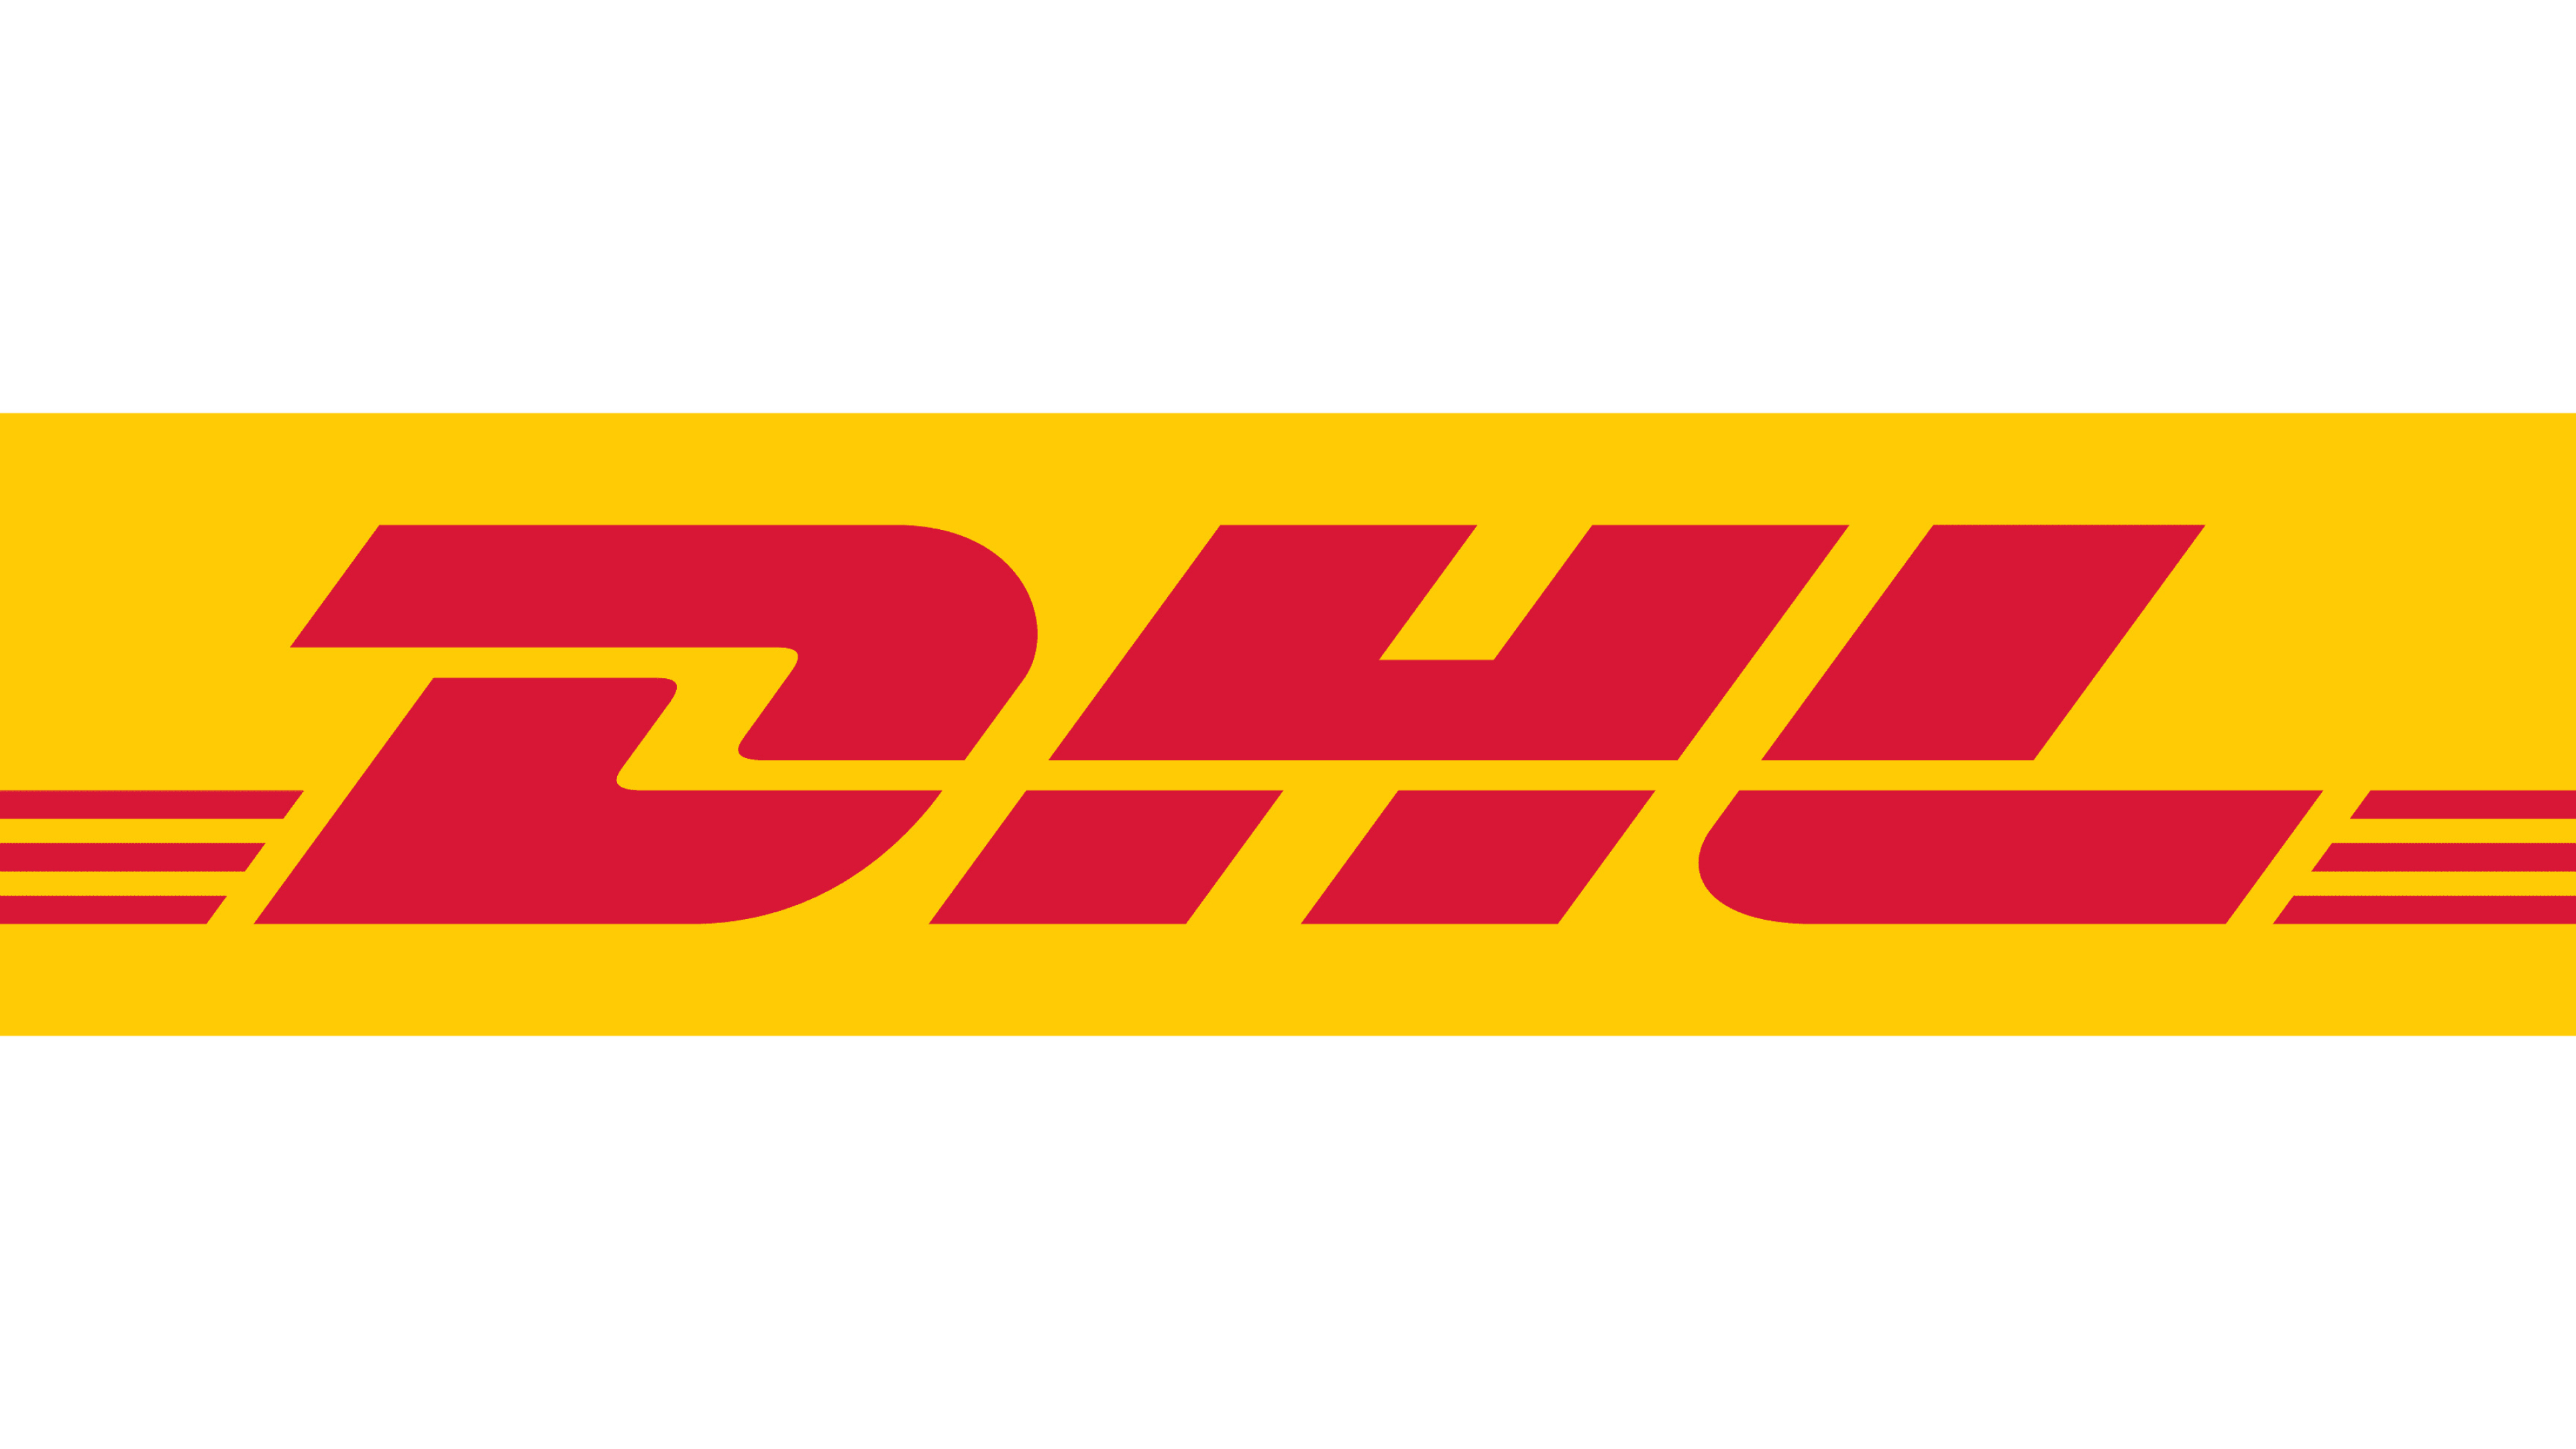 DHL: The global leader in the logistics industry, 380,000 people in over 220 countries. 3840x2160 4K Background.